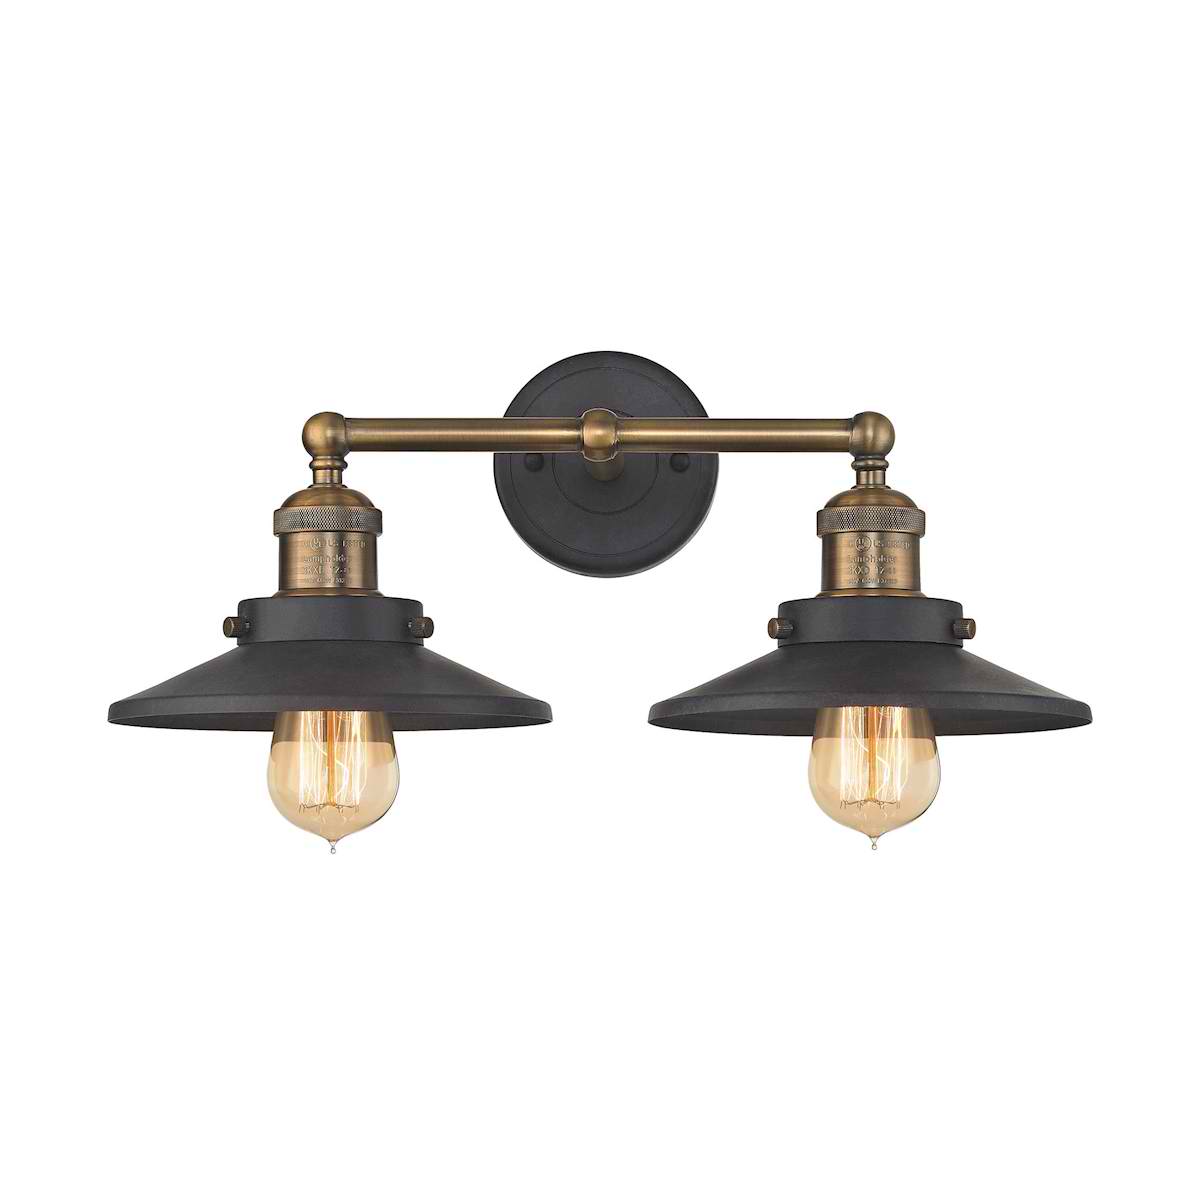 English Pub 2 Light Vanity in Tarnished Graphite and Antique Brass